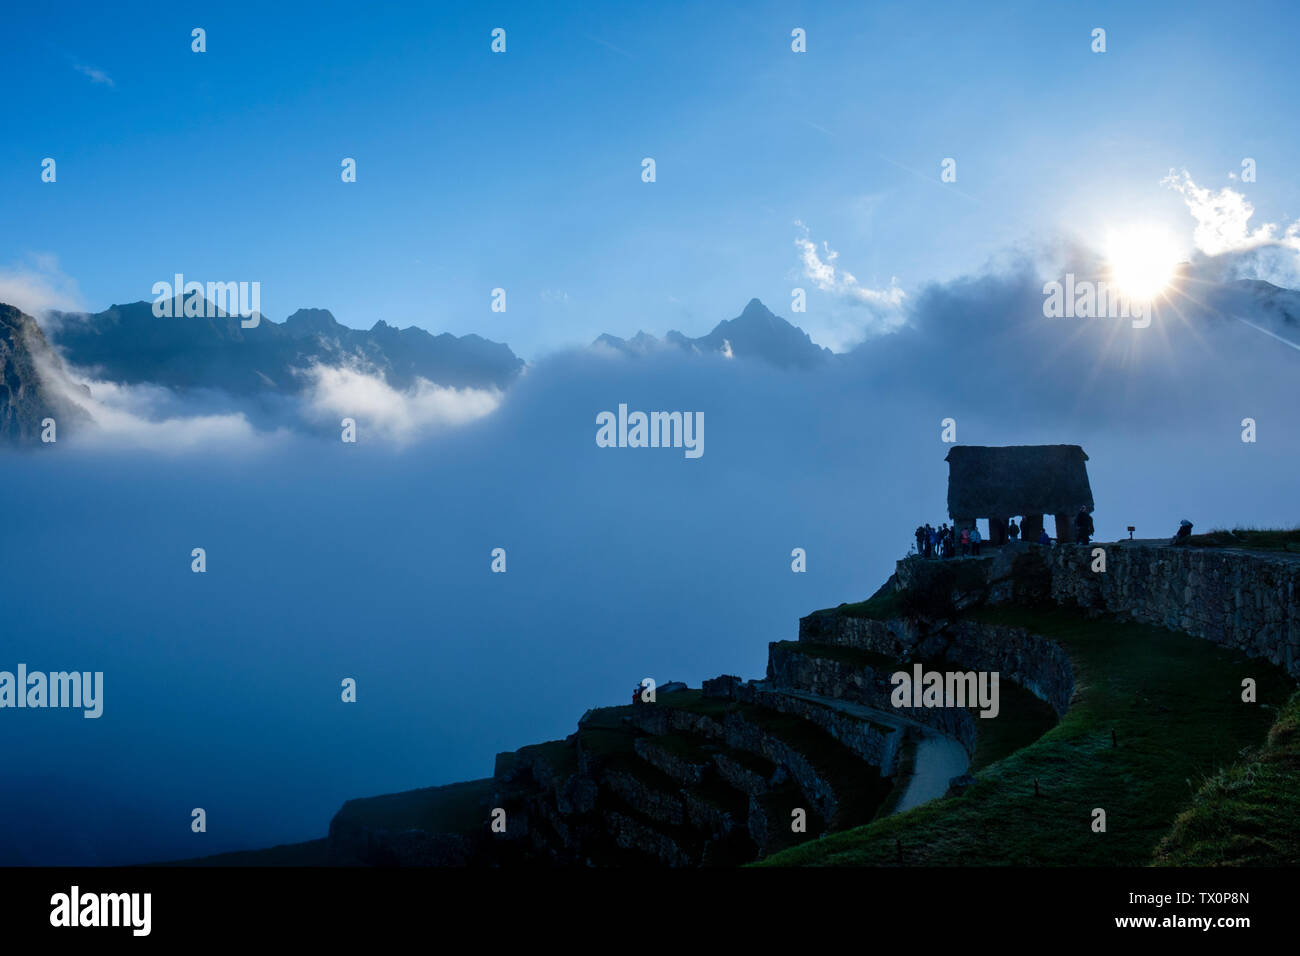 Early morning view of Machu Picchu guardhouse, Sacred Valley of the Incas, Peru. Tourists waiting for the first light at sunrise, Machu Picchu Peru. Stock Photo